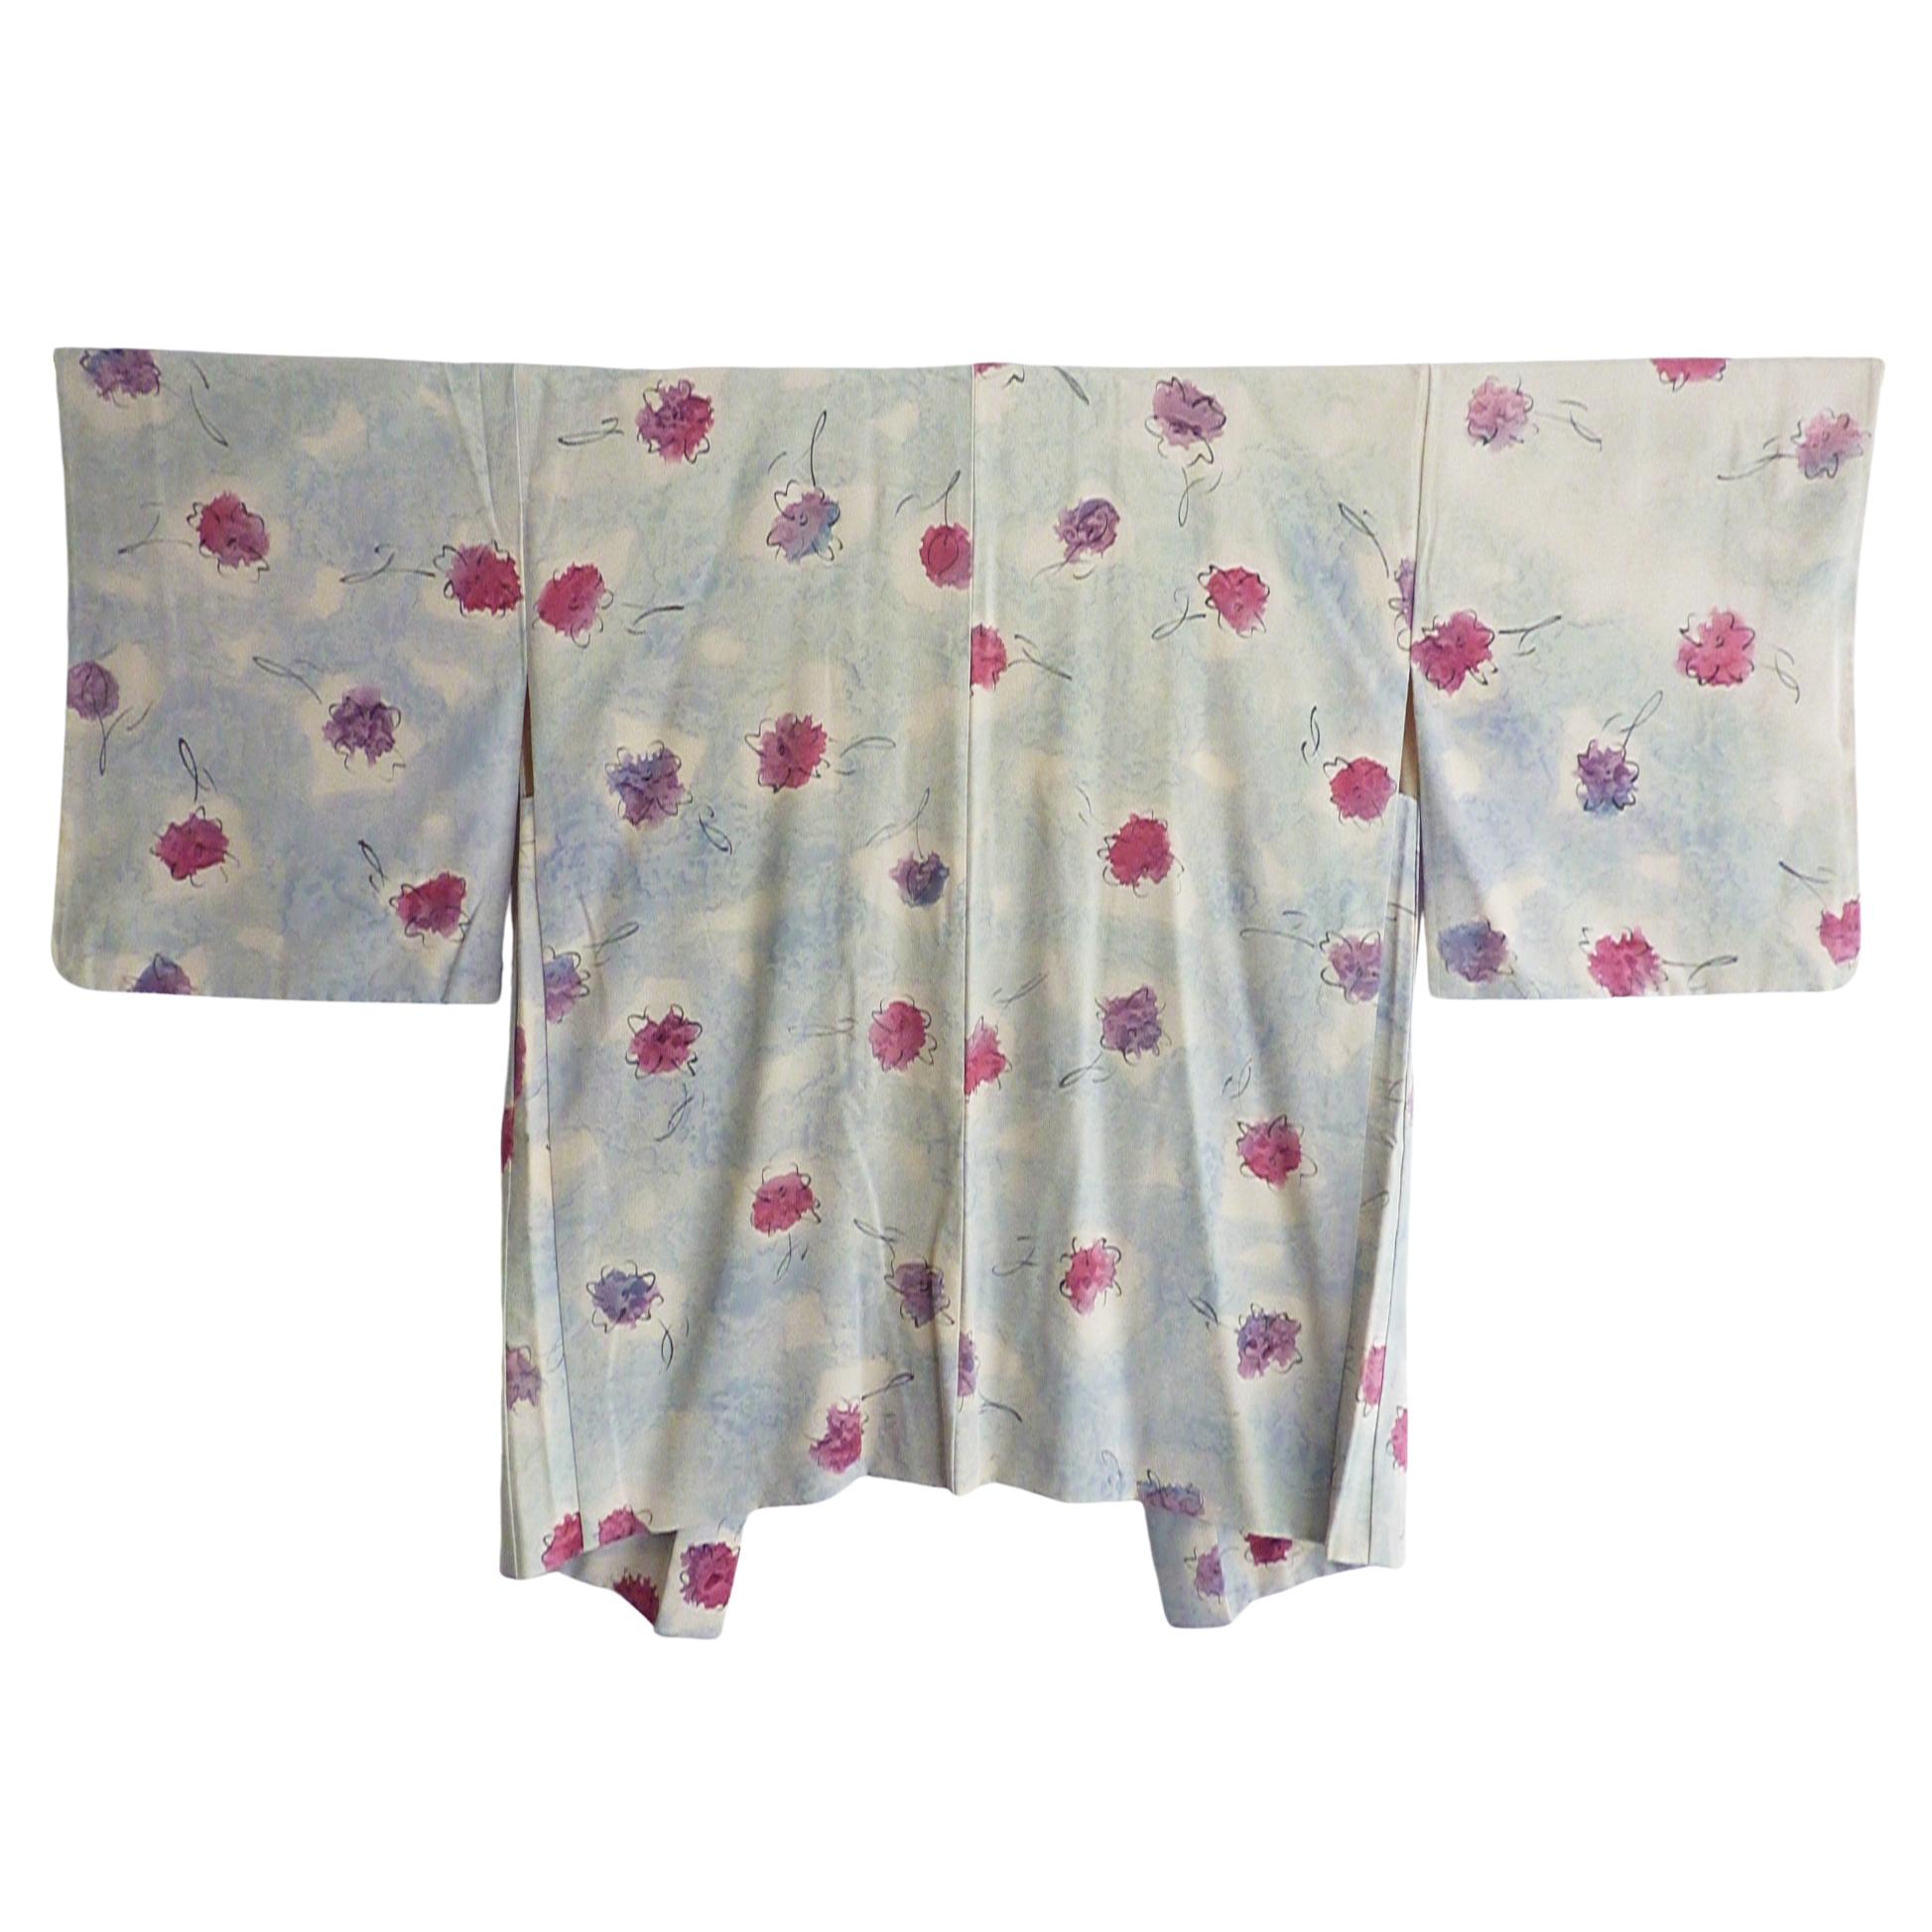 Circa: Meiji
Place of Origin: Japan
Material: Silk
Condition: Very good
Blue gray misty puffy clouds and hand-sketched flowers all silk kimono is handmade in old Japan.
Some loose threads and age spots. Will leave it to new owner to refresh.
Total